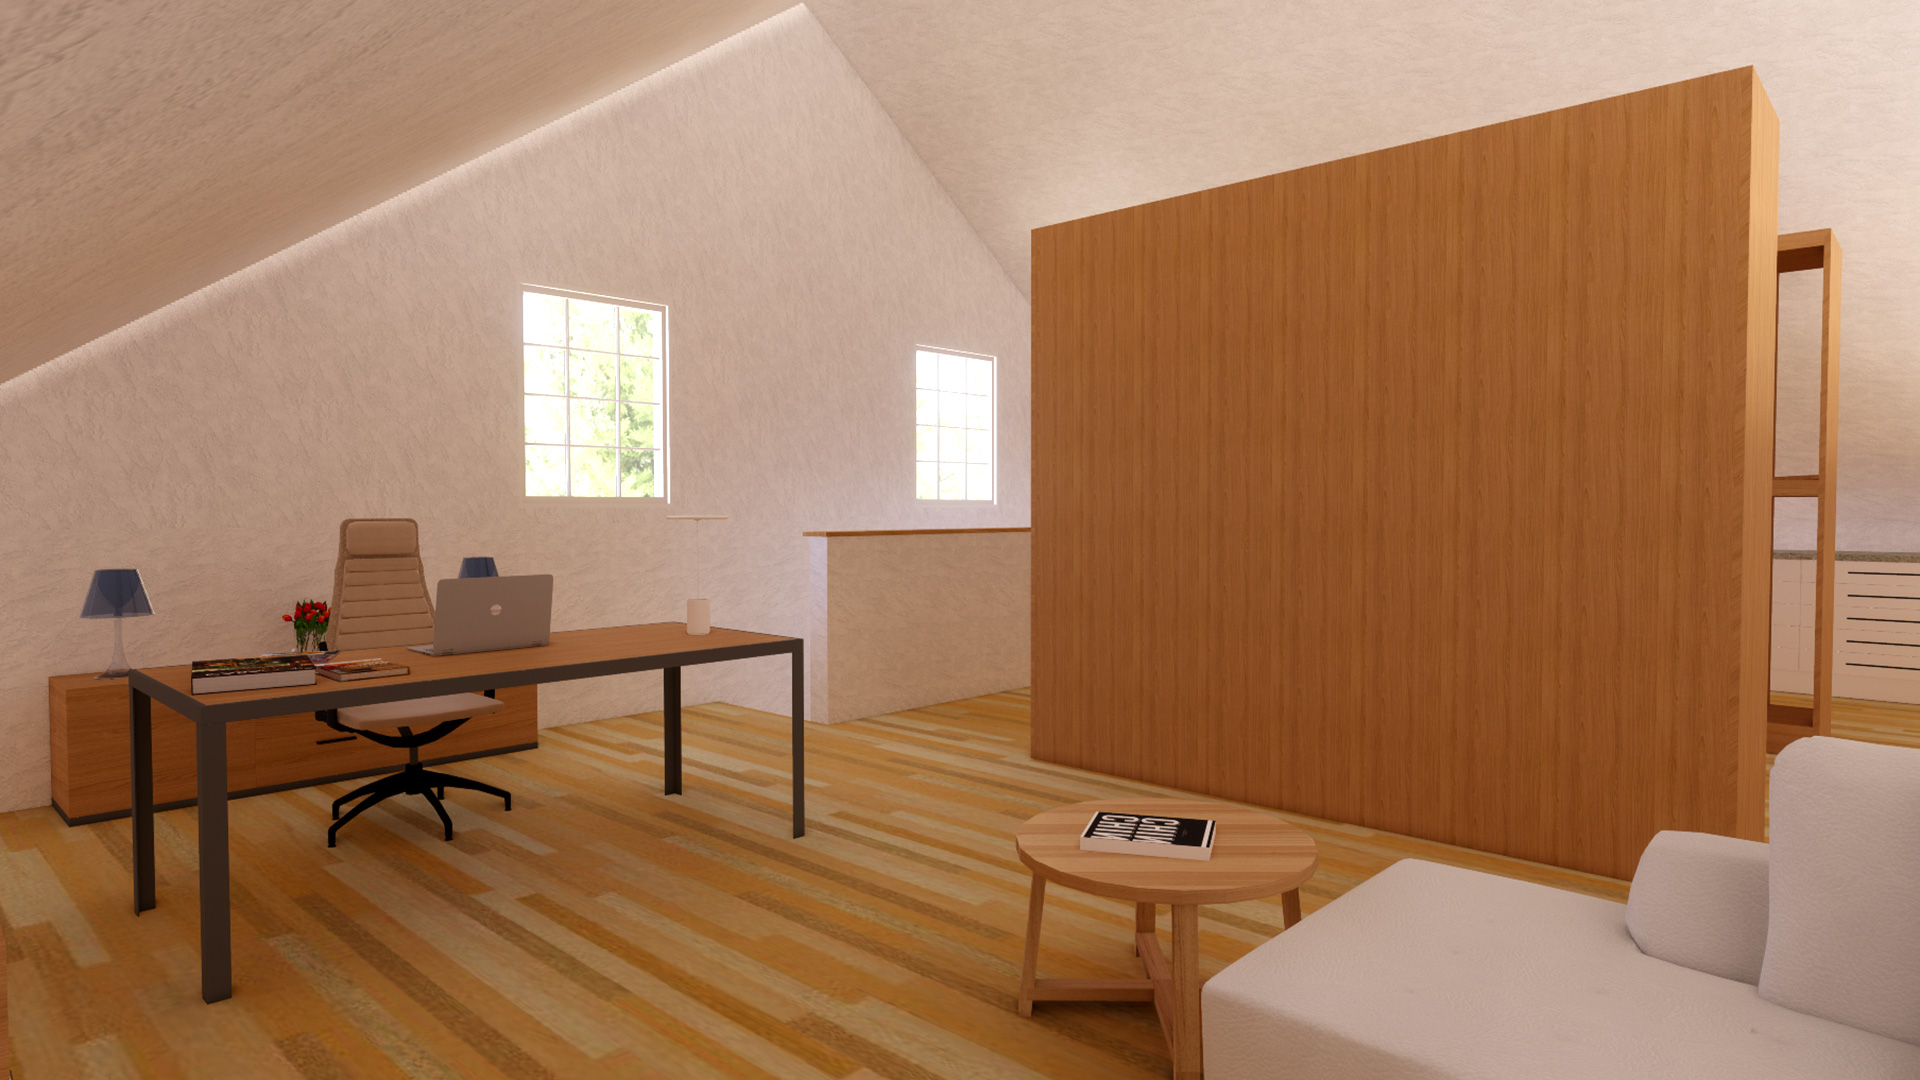 Office space above garage, windows bringing in light to white walls and wooden floors